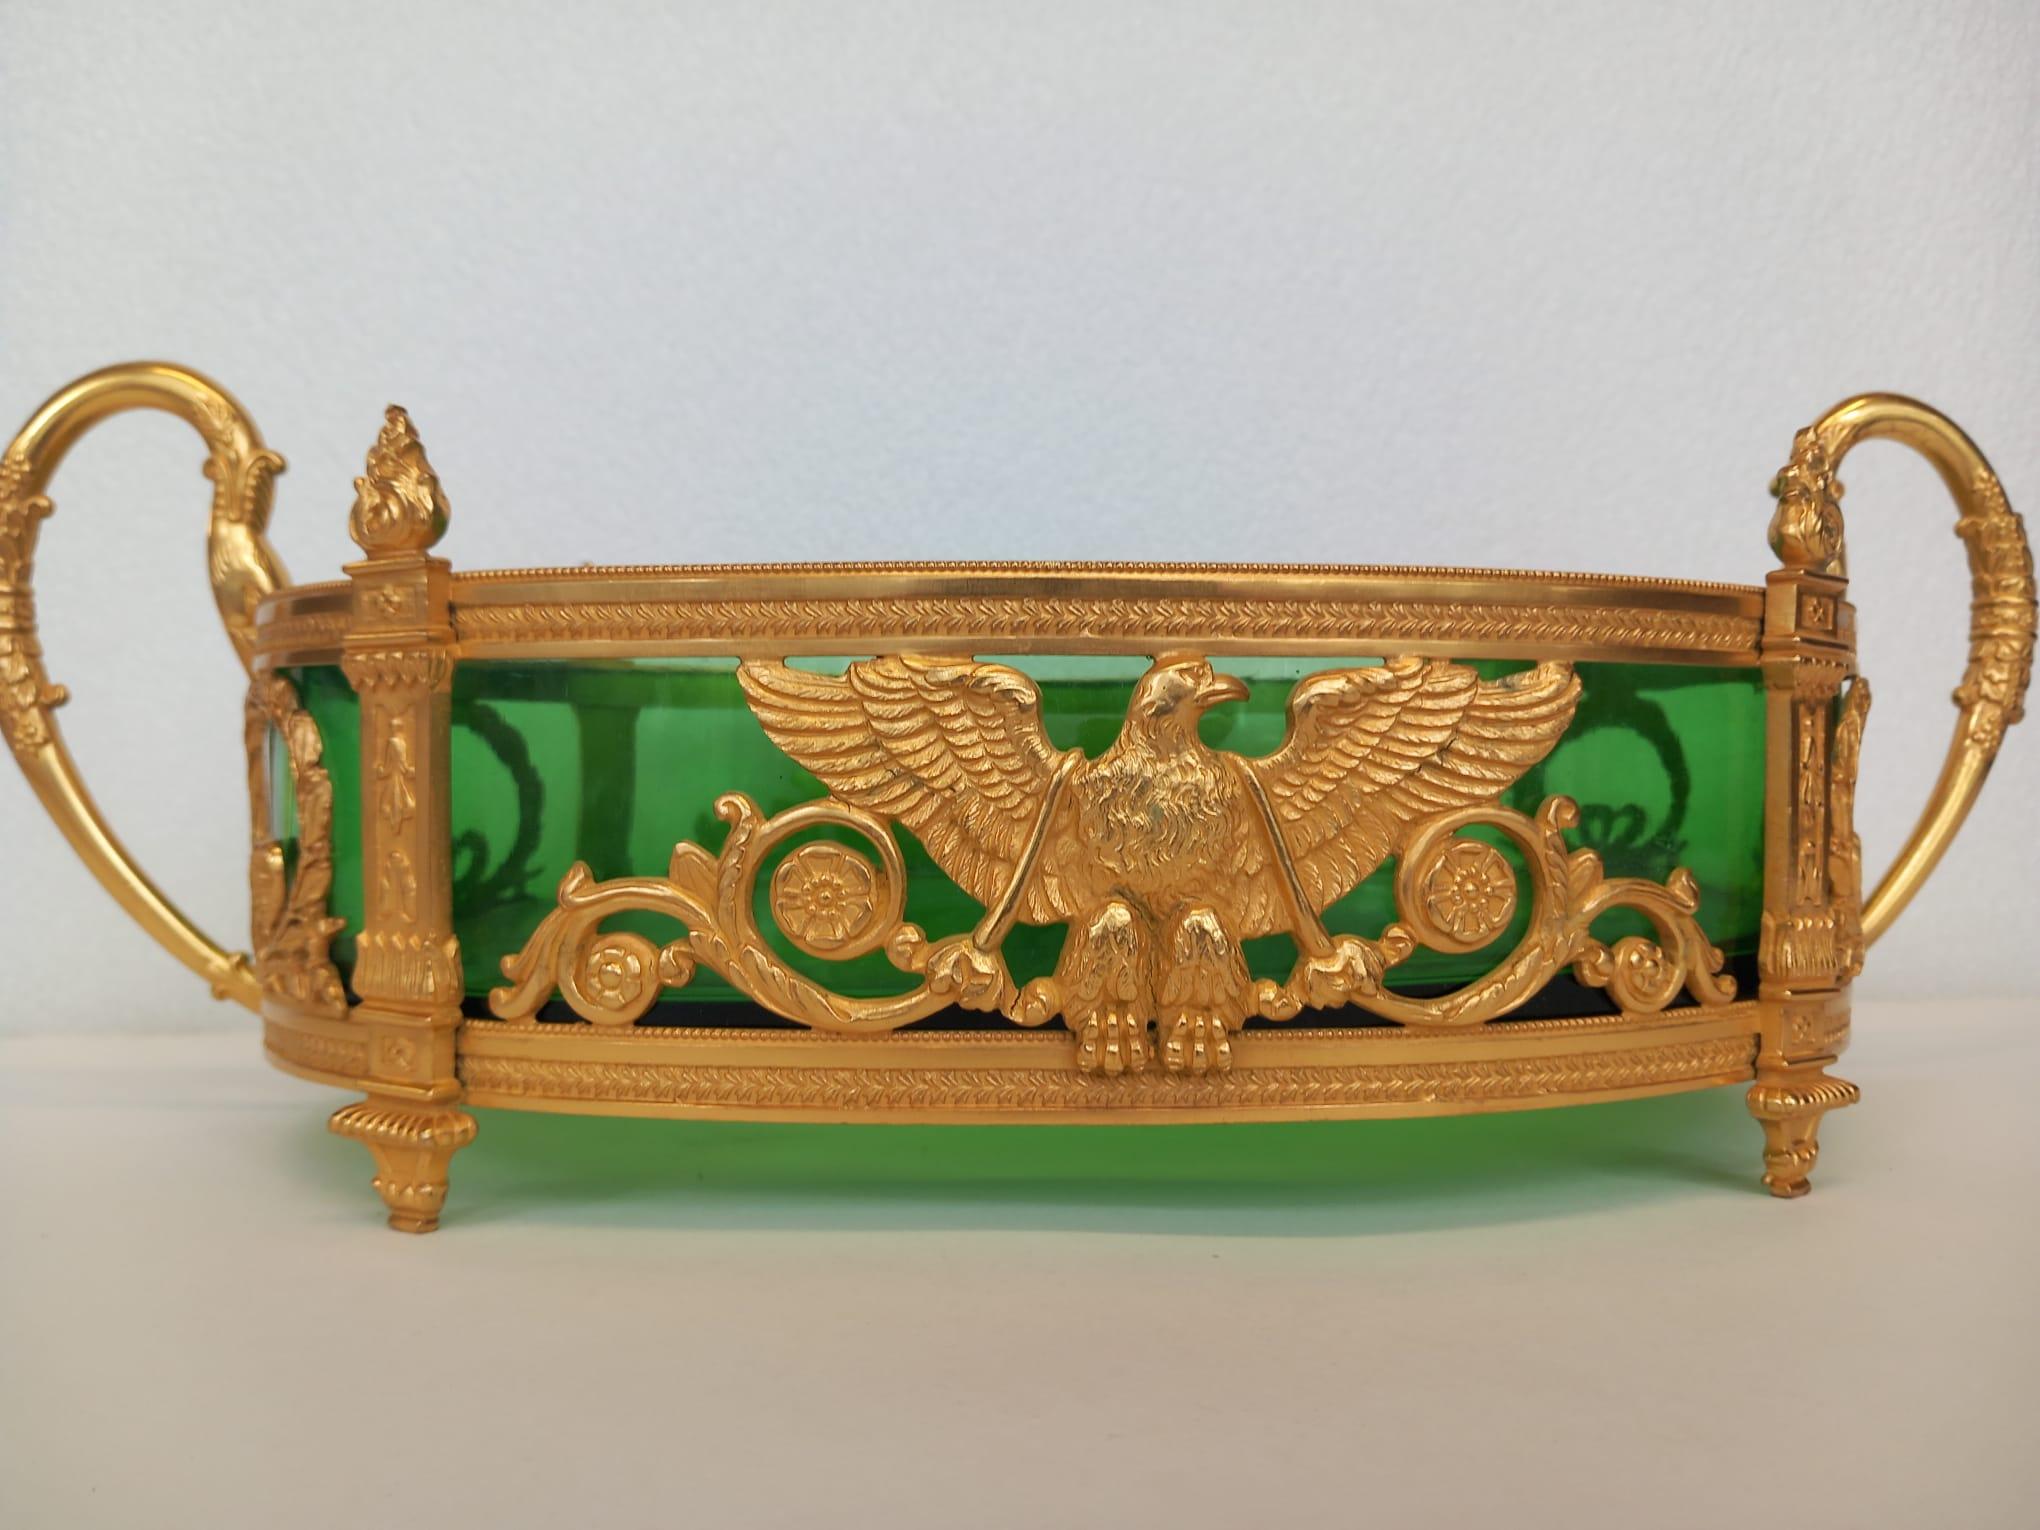 A nineteenth century French gilt bronze and glass jardiniere, the green glass liner sitting in an ormolu body, designed in the Napoleonic fashion with the eagle sitting with its majestic wings spread and the sides decorated with Napoleon’s leaf